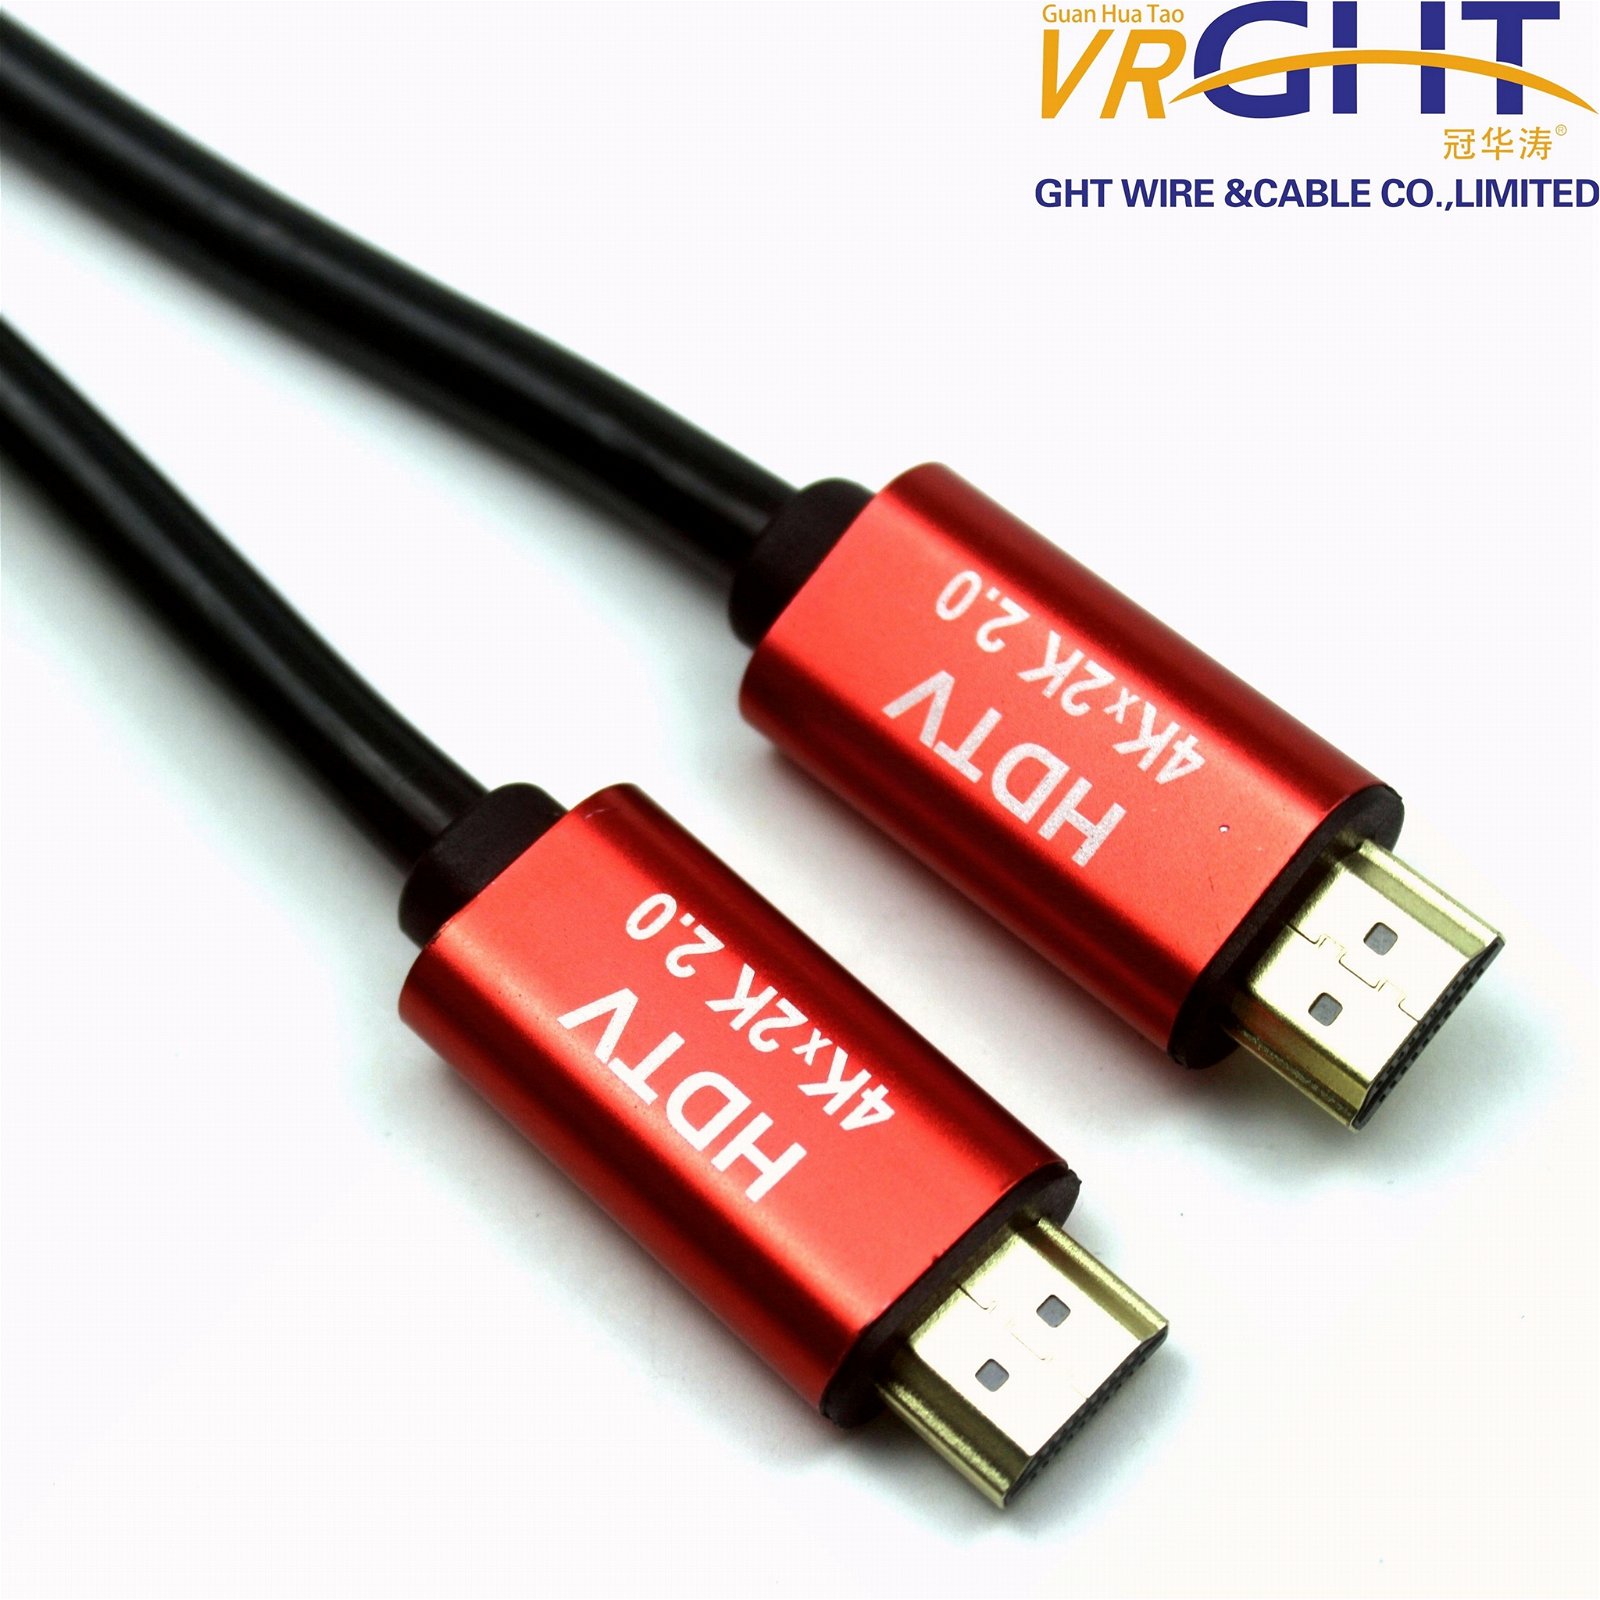  19+1 HDMI CABLE RED ALLOY